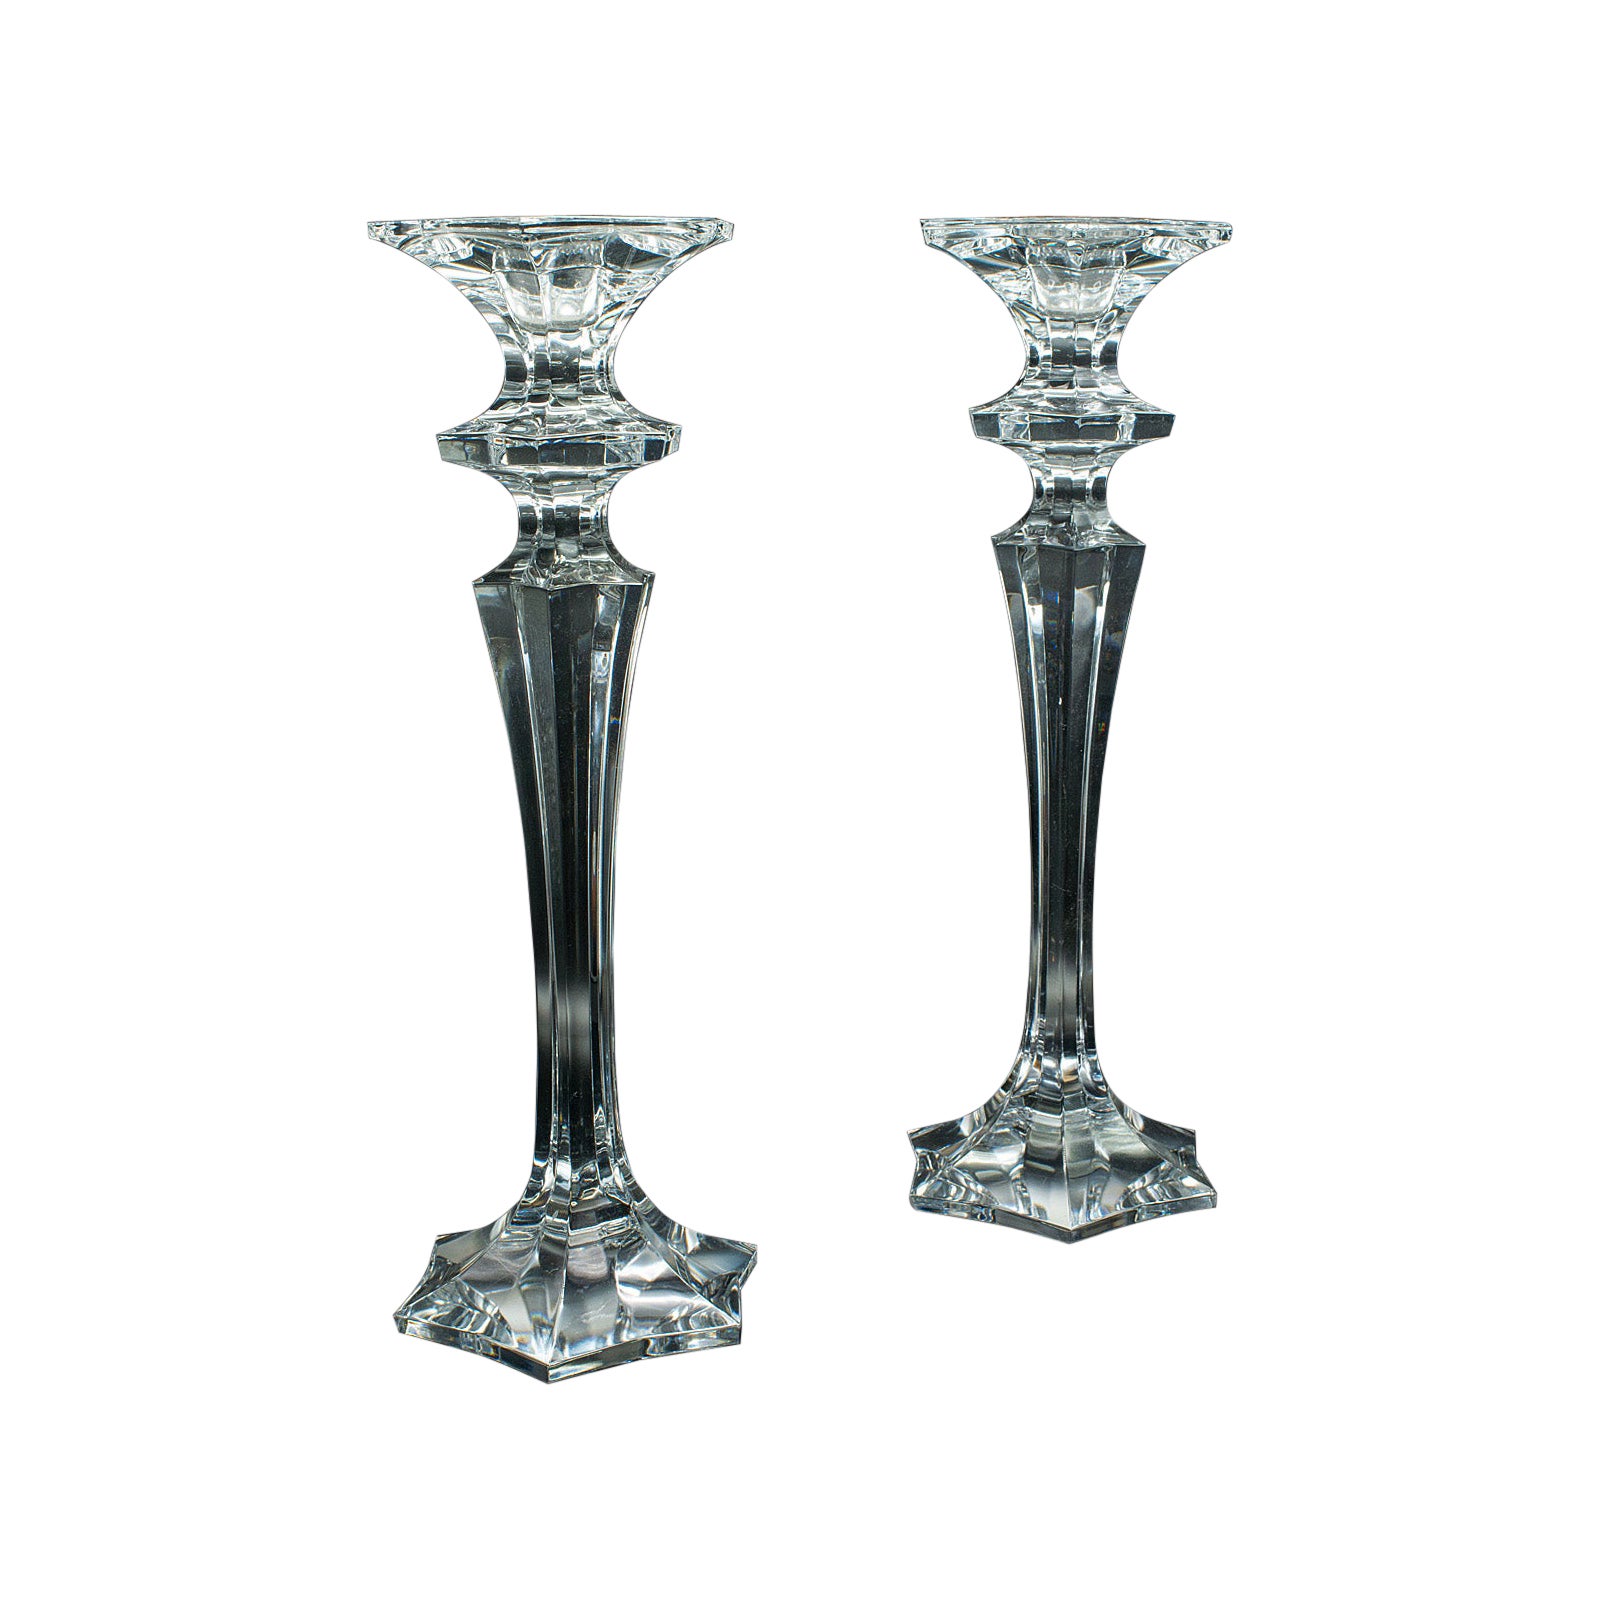 Pair Of Vintage Candlesticks, English, Glass, Decorative Candle Nozzle, C.1970 For Sale